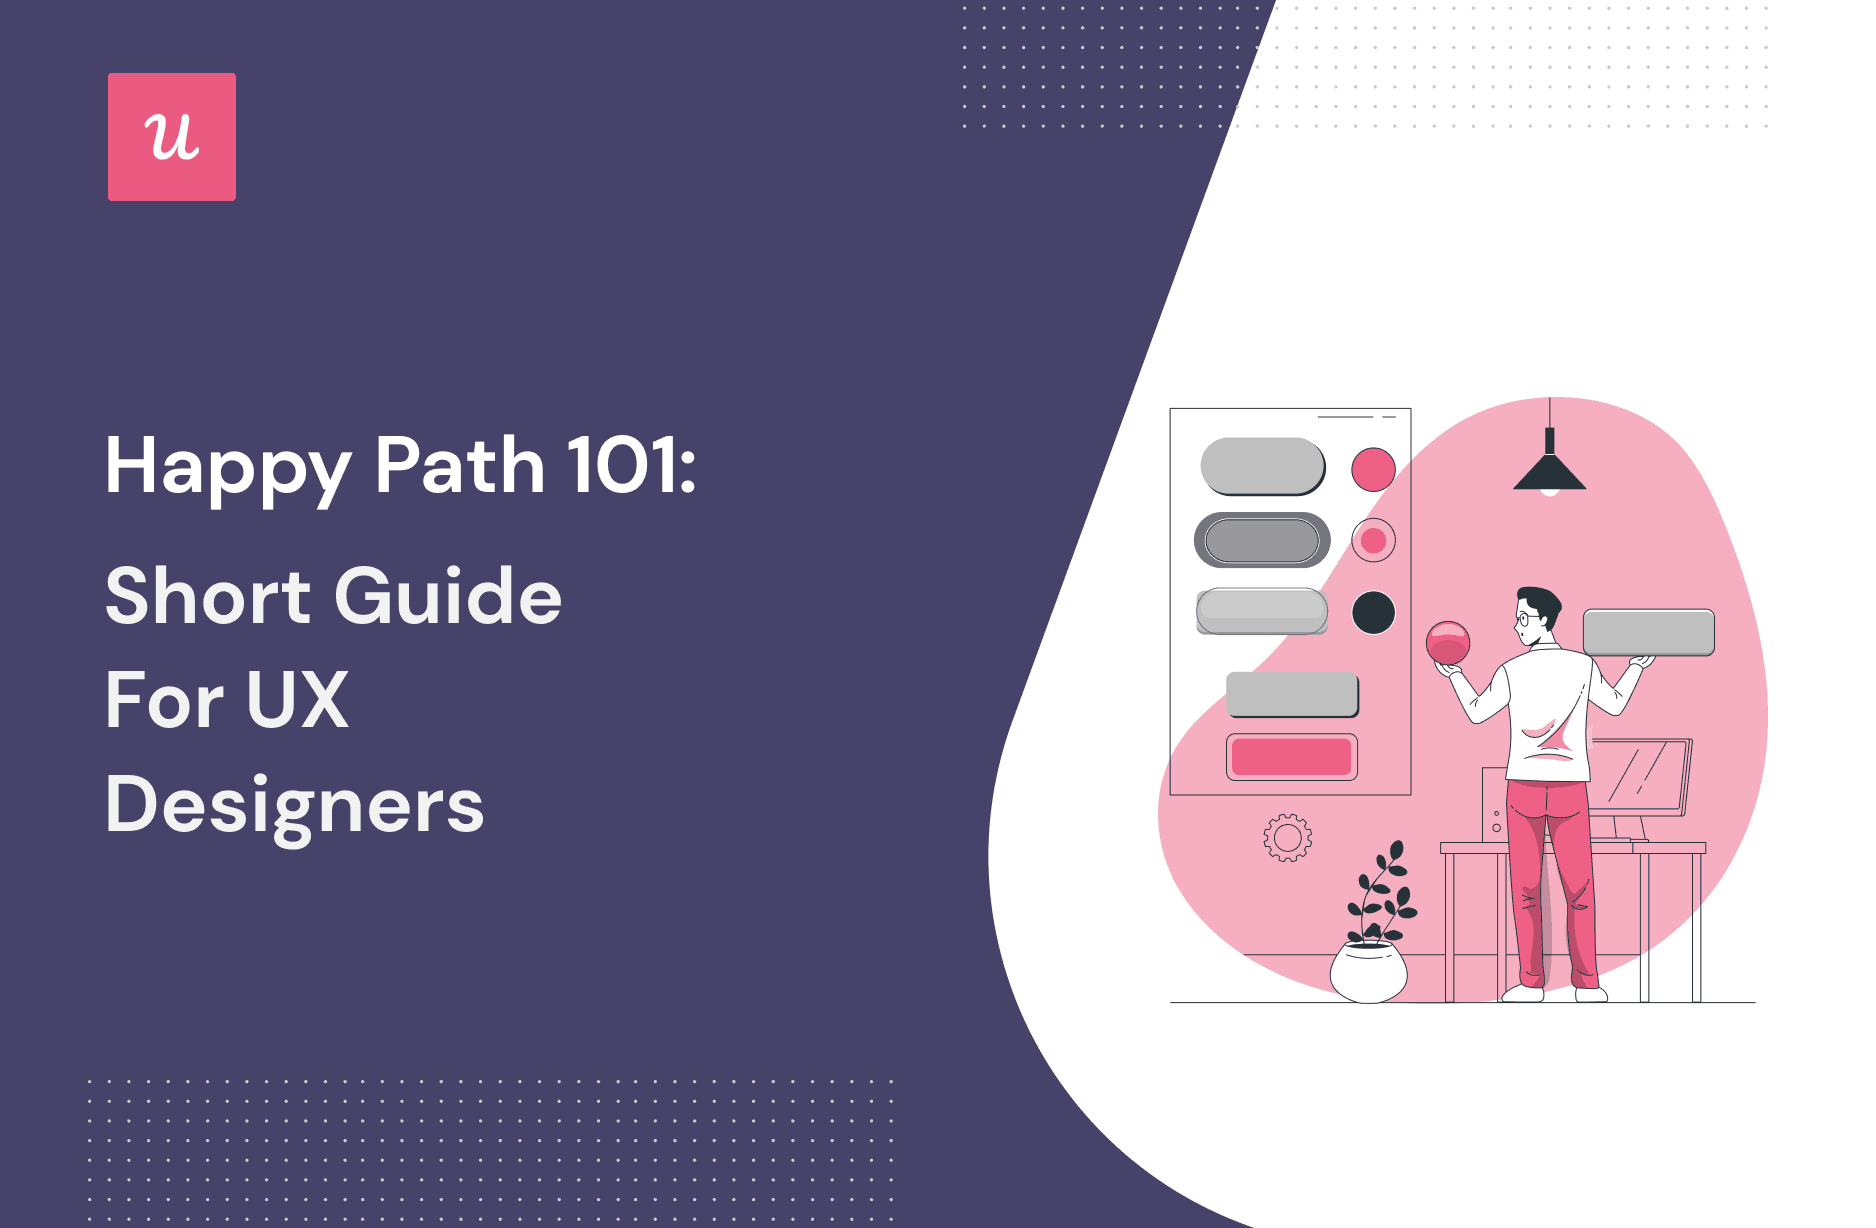 Happy Path 101: A Short Guide for UX Designers